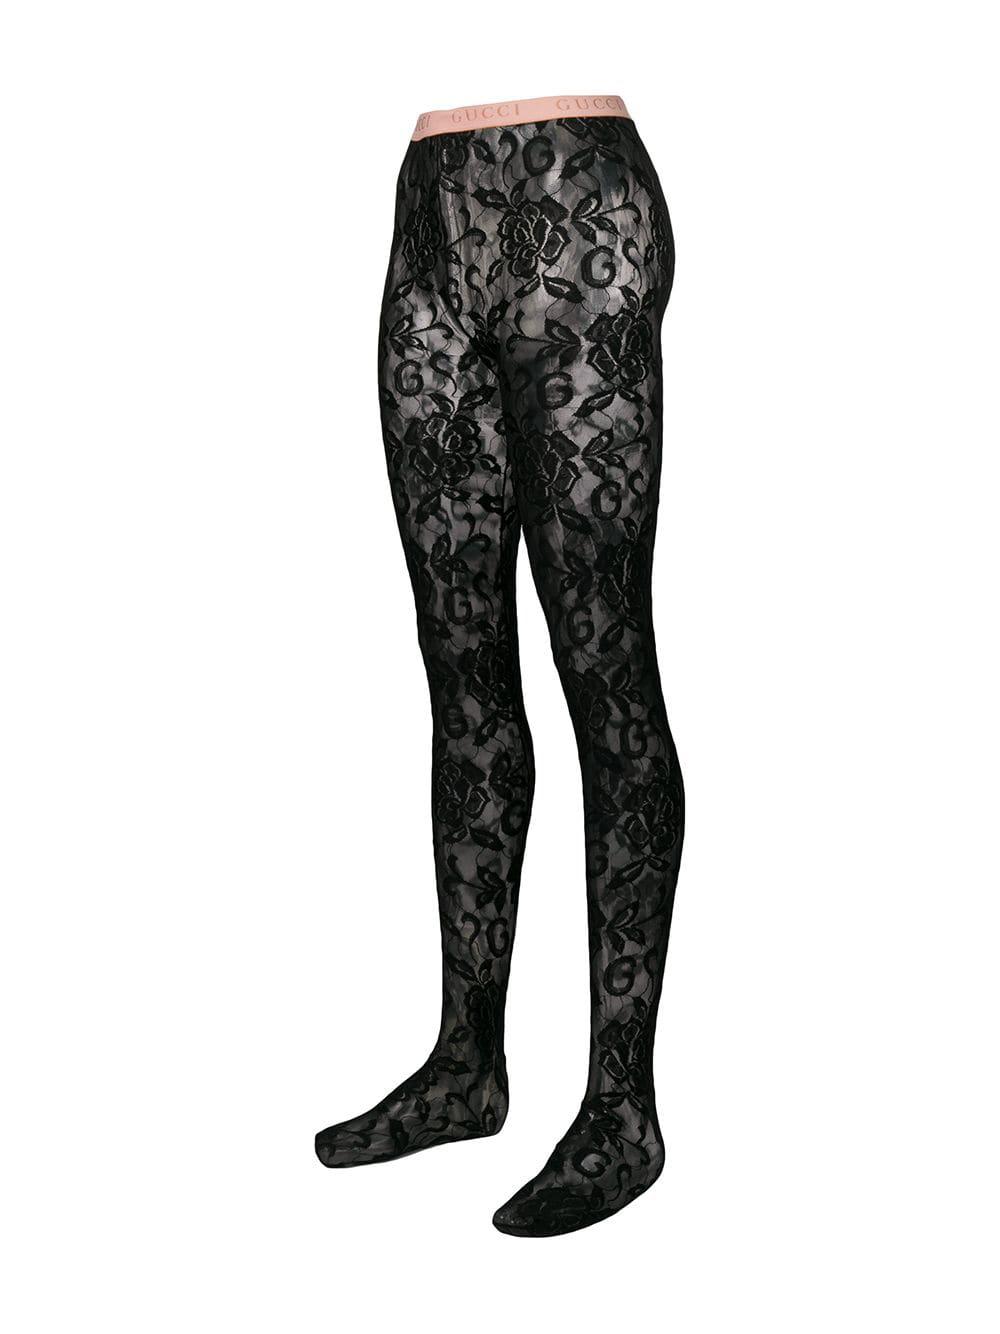 Gucci Floral Lace Tights in Black - Lyst